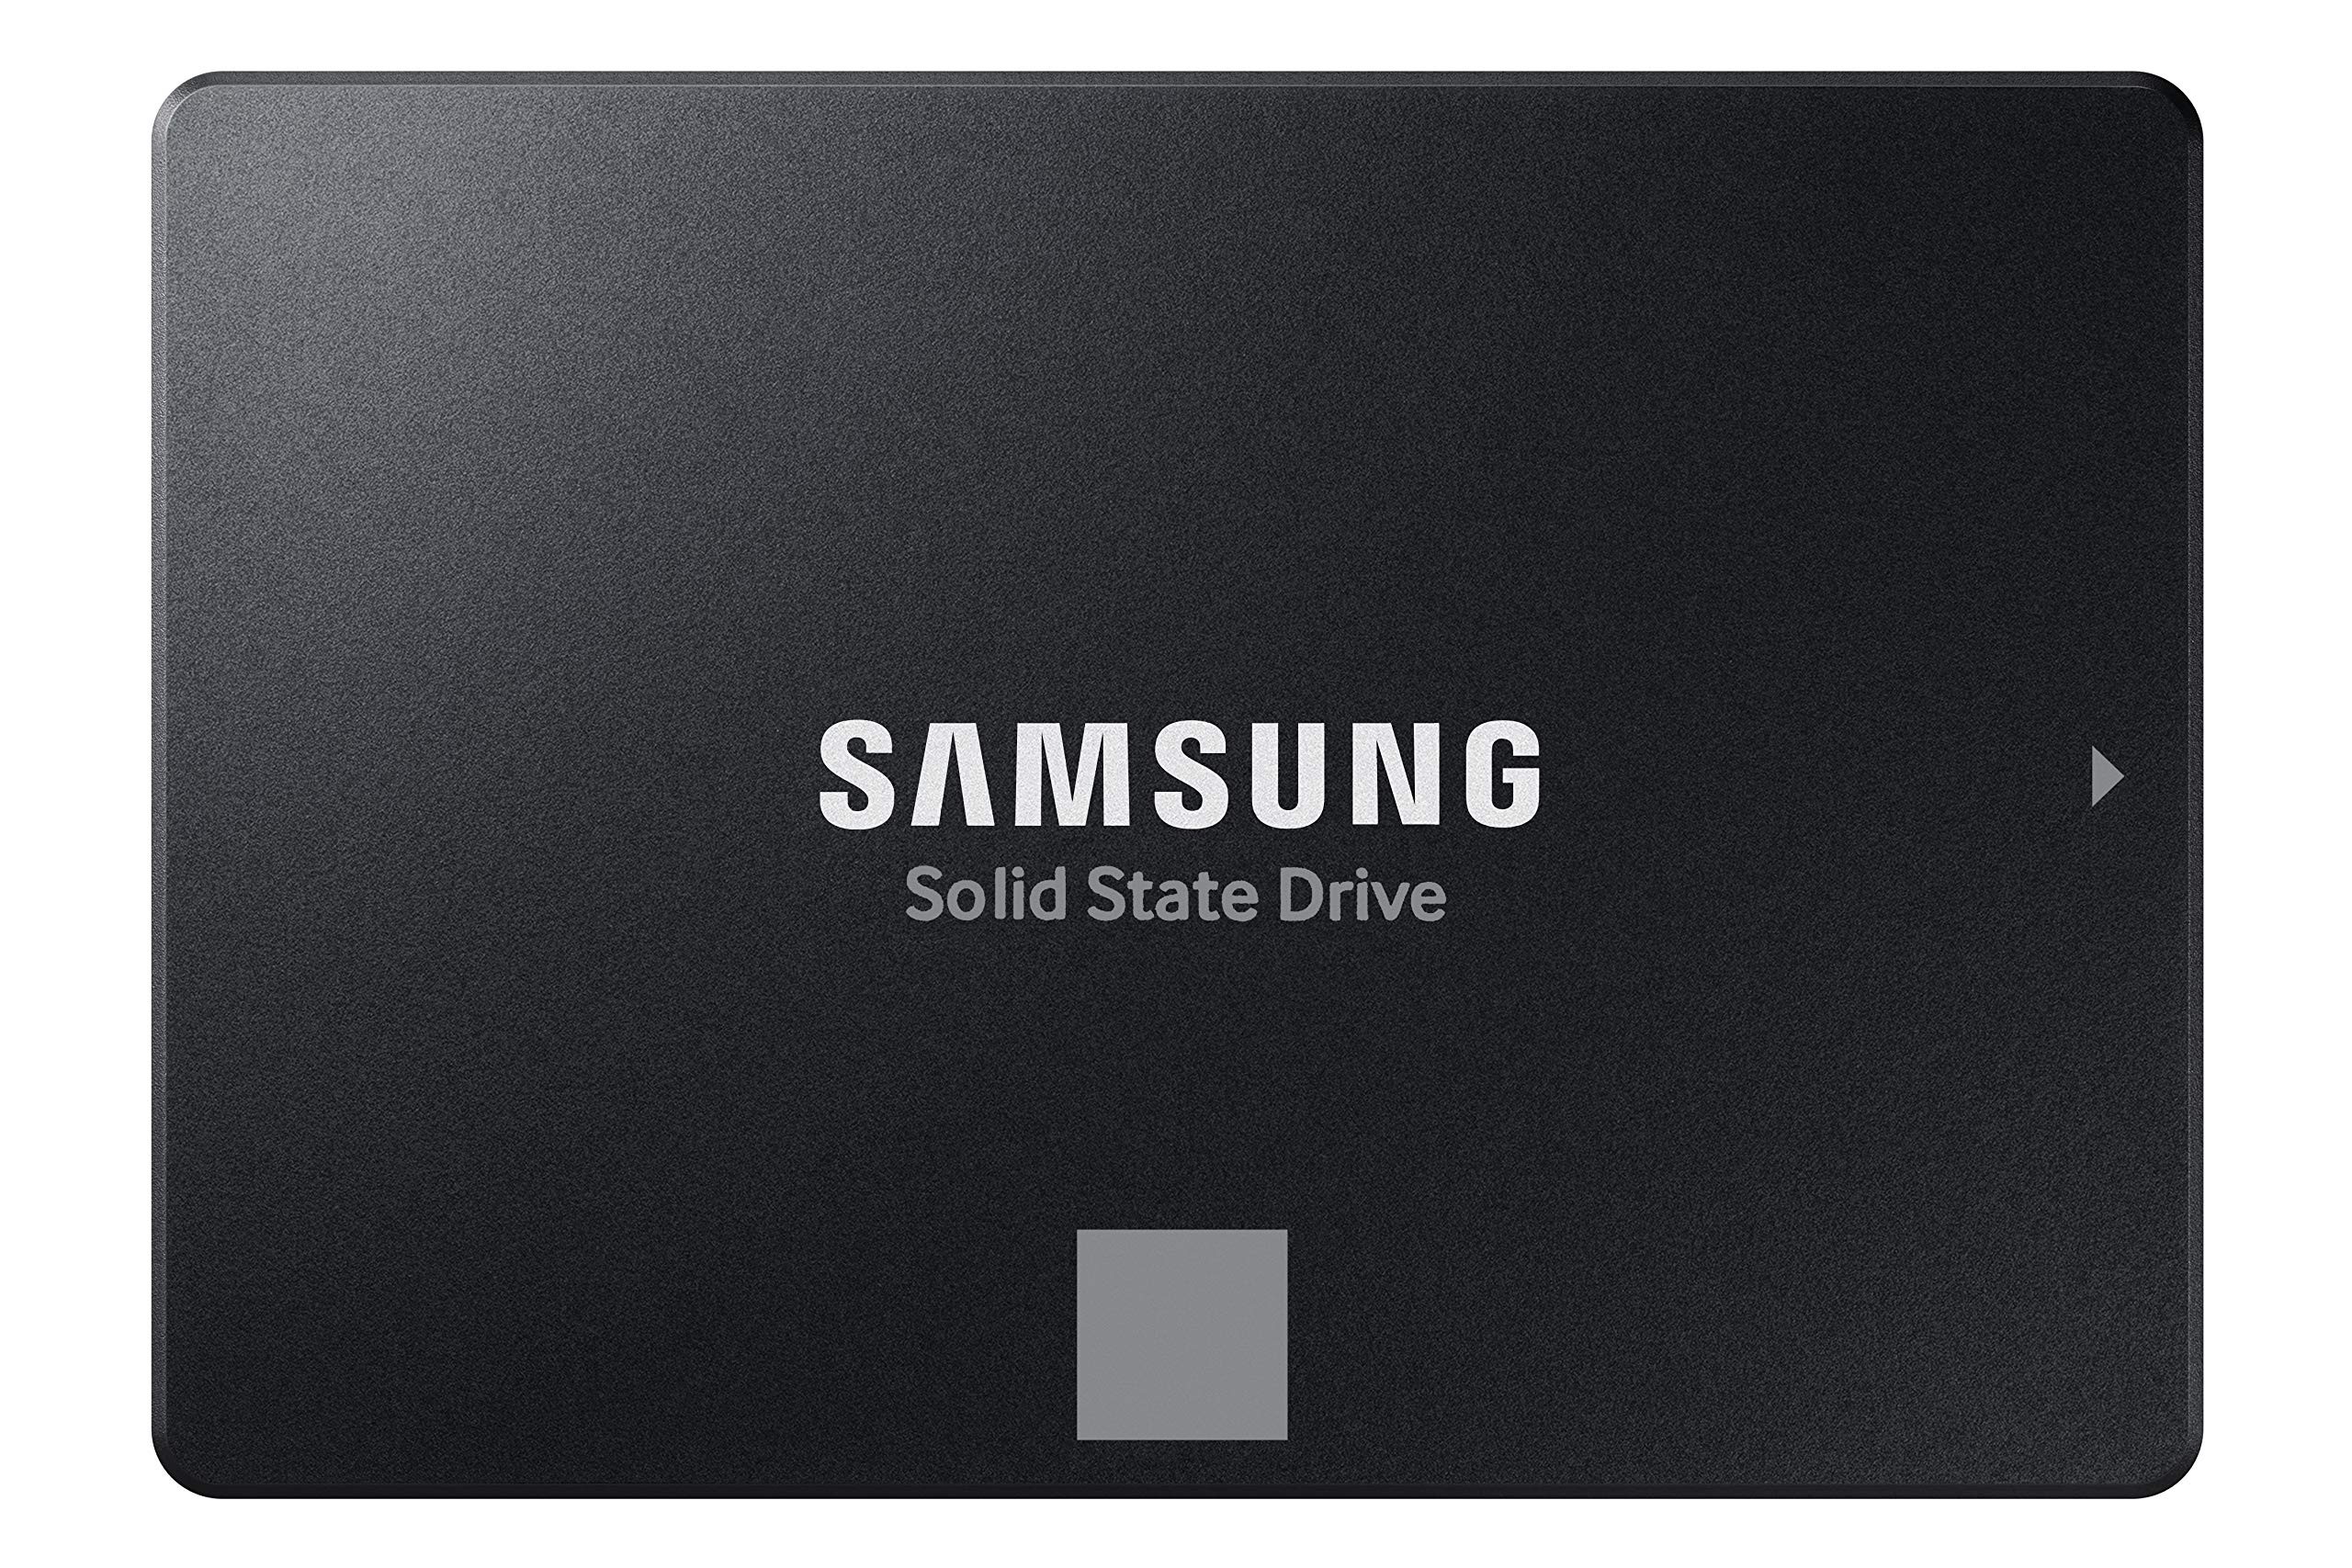 SAMSUNG 870 EVO SATA SSD 500GB 2.5 Internal Solid State Drive Upgrade PC or Laptop Memory and Storage for IT Pros Creato